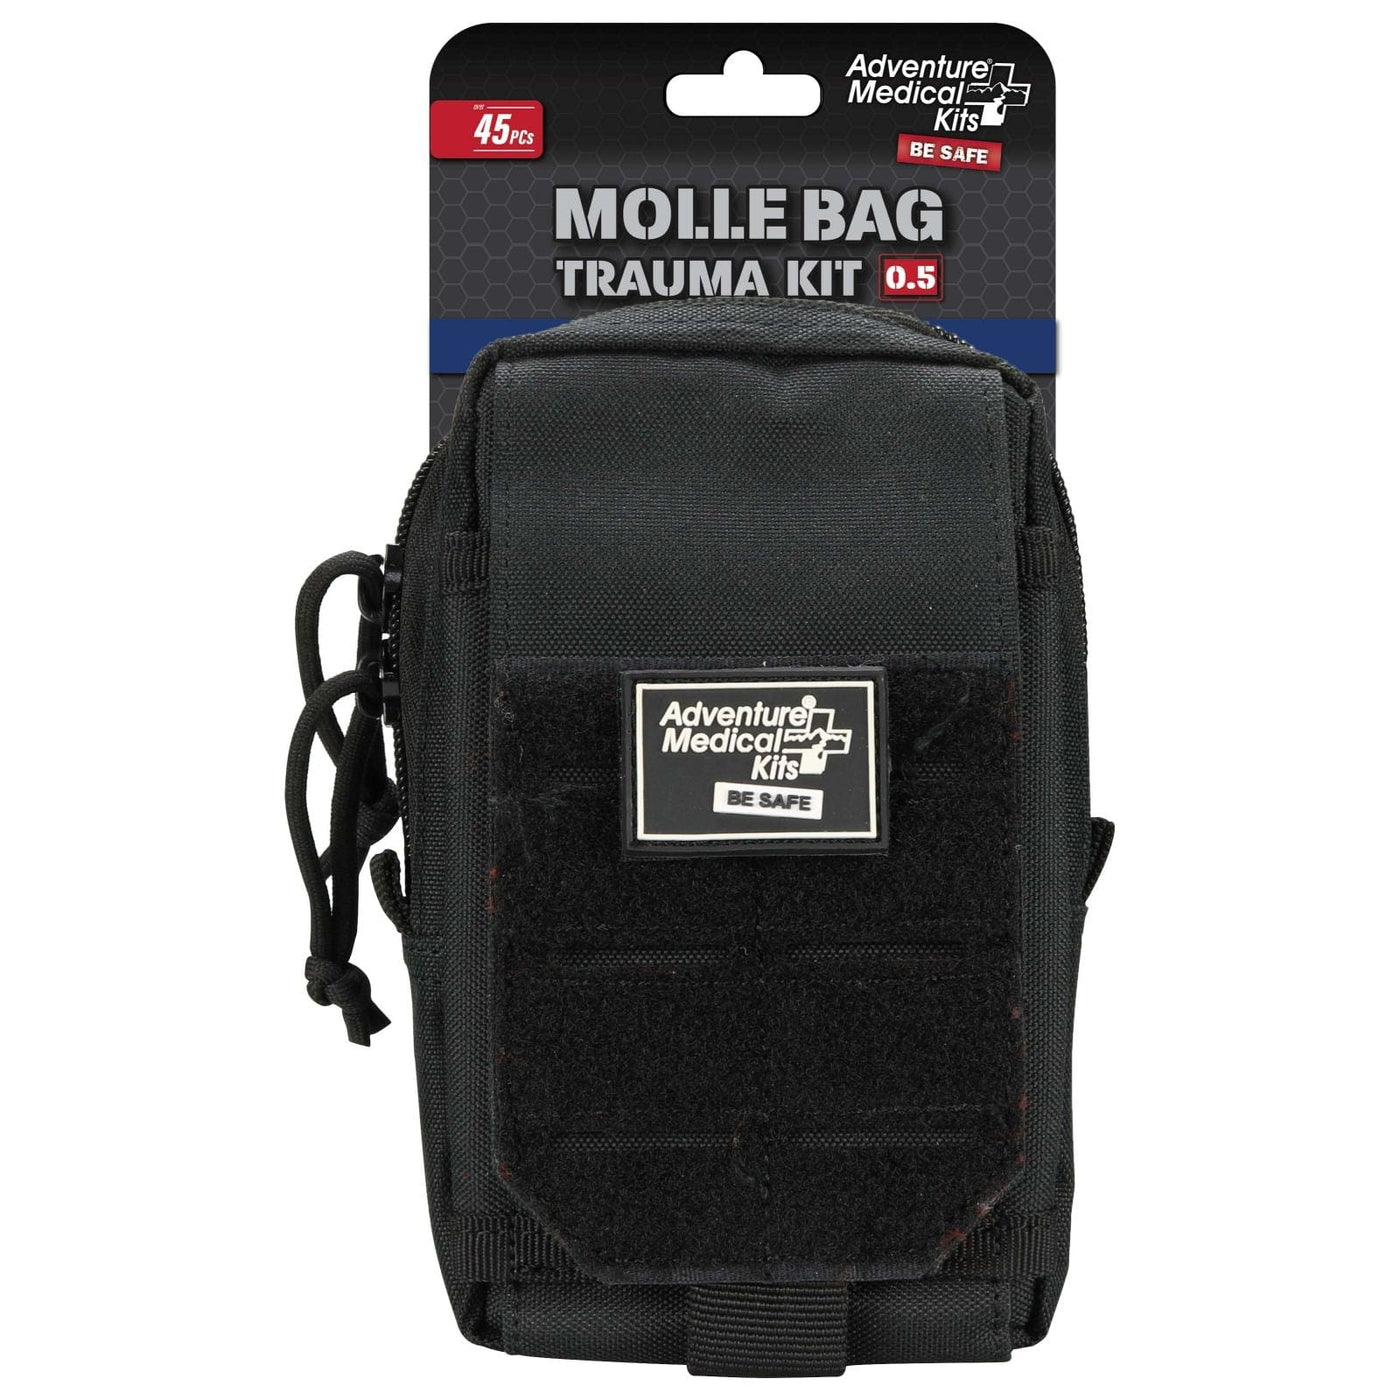 Adventure Medical Kits Adventure Medical MOLLE Trauma Kit .5 - Black Camping And Outdoor